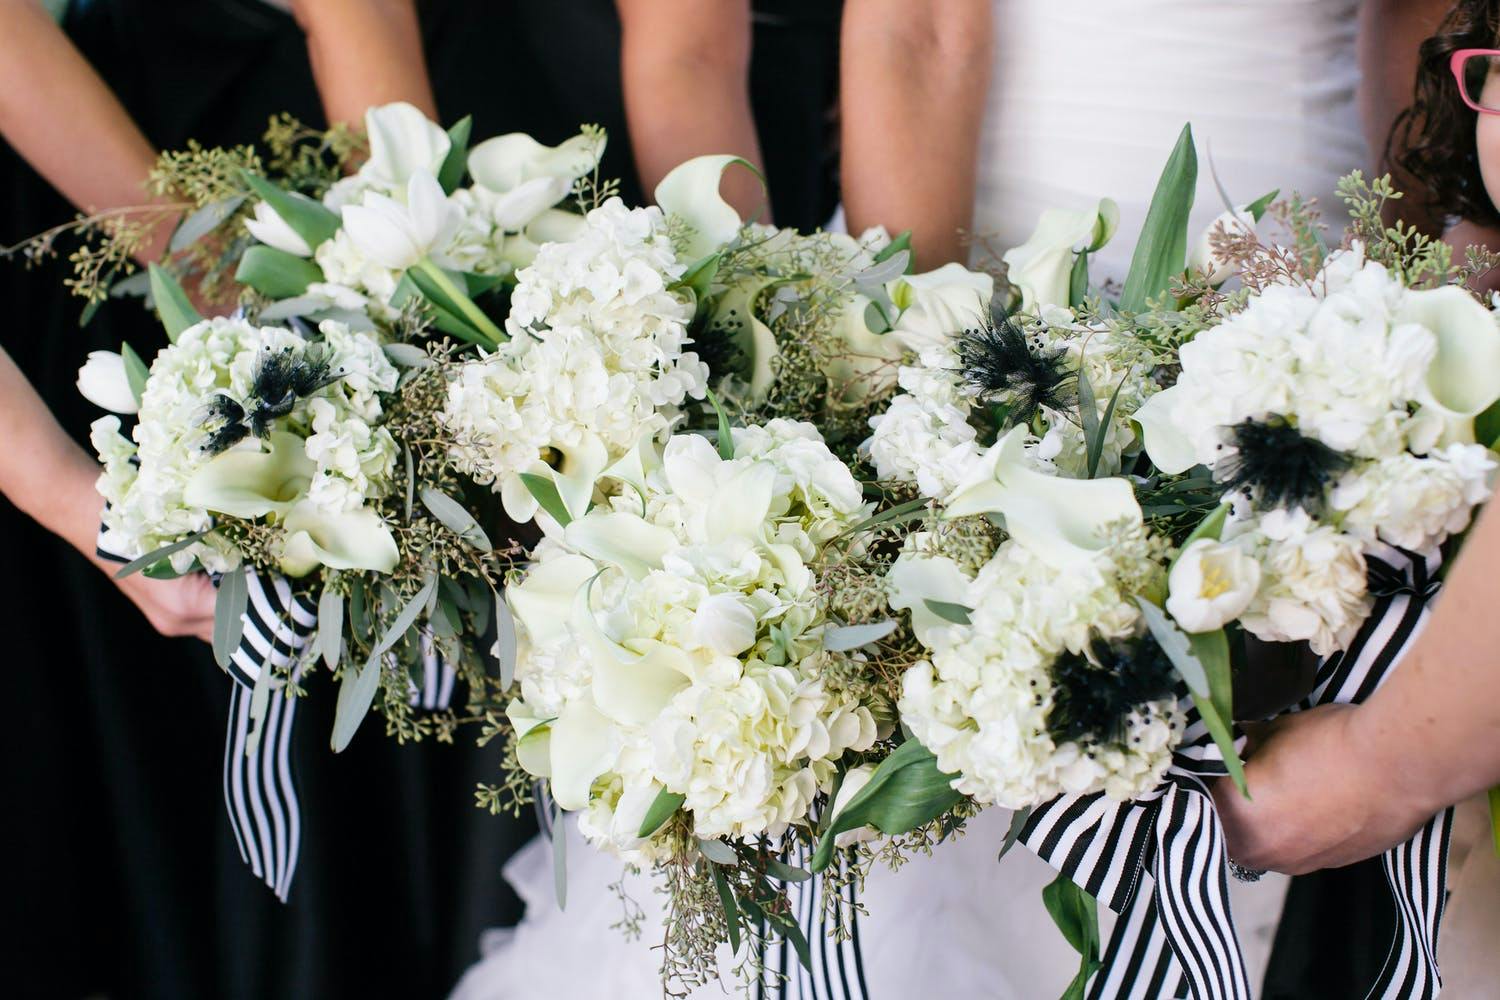 White Bridal Bouquets with Black and White Striped Ribbons | PartySlate